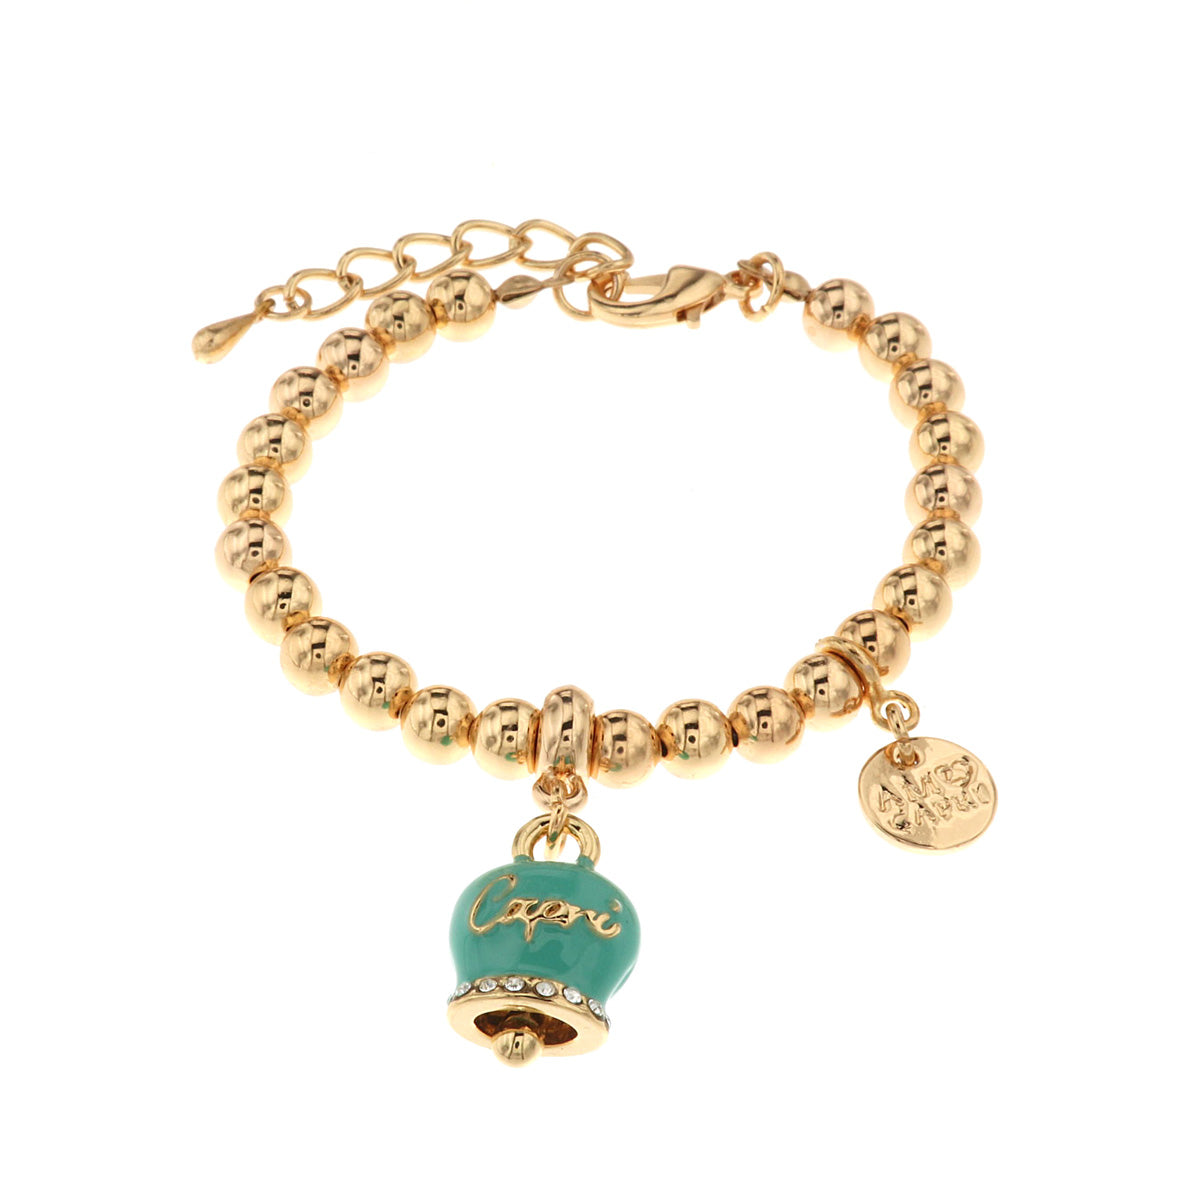 Metal bracelet spheres with green bell with capri writing